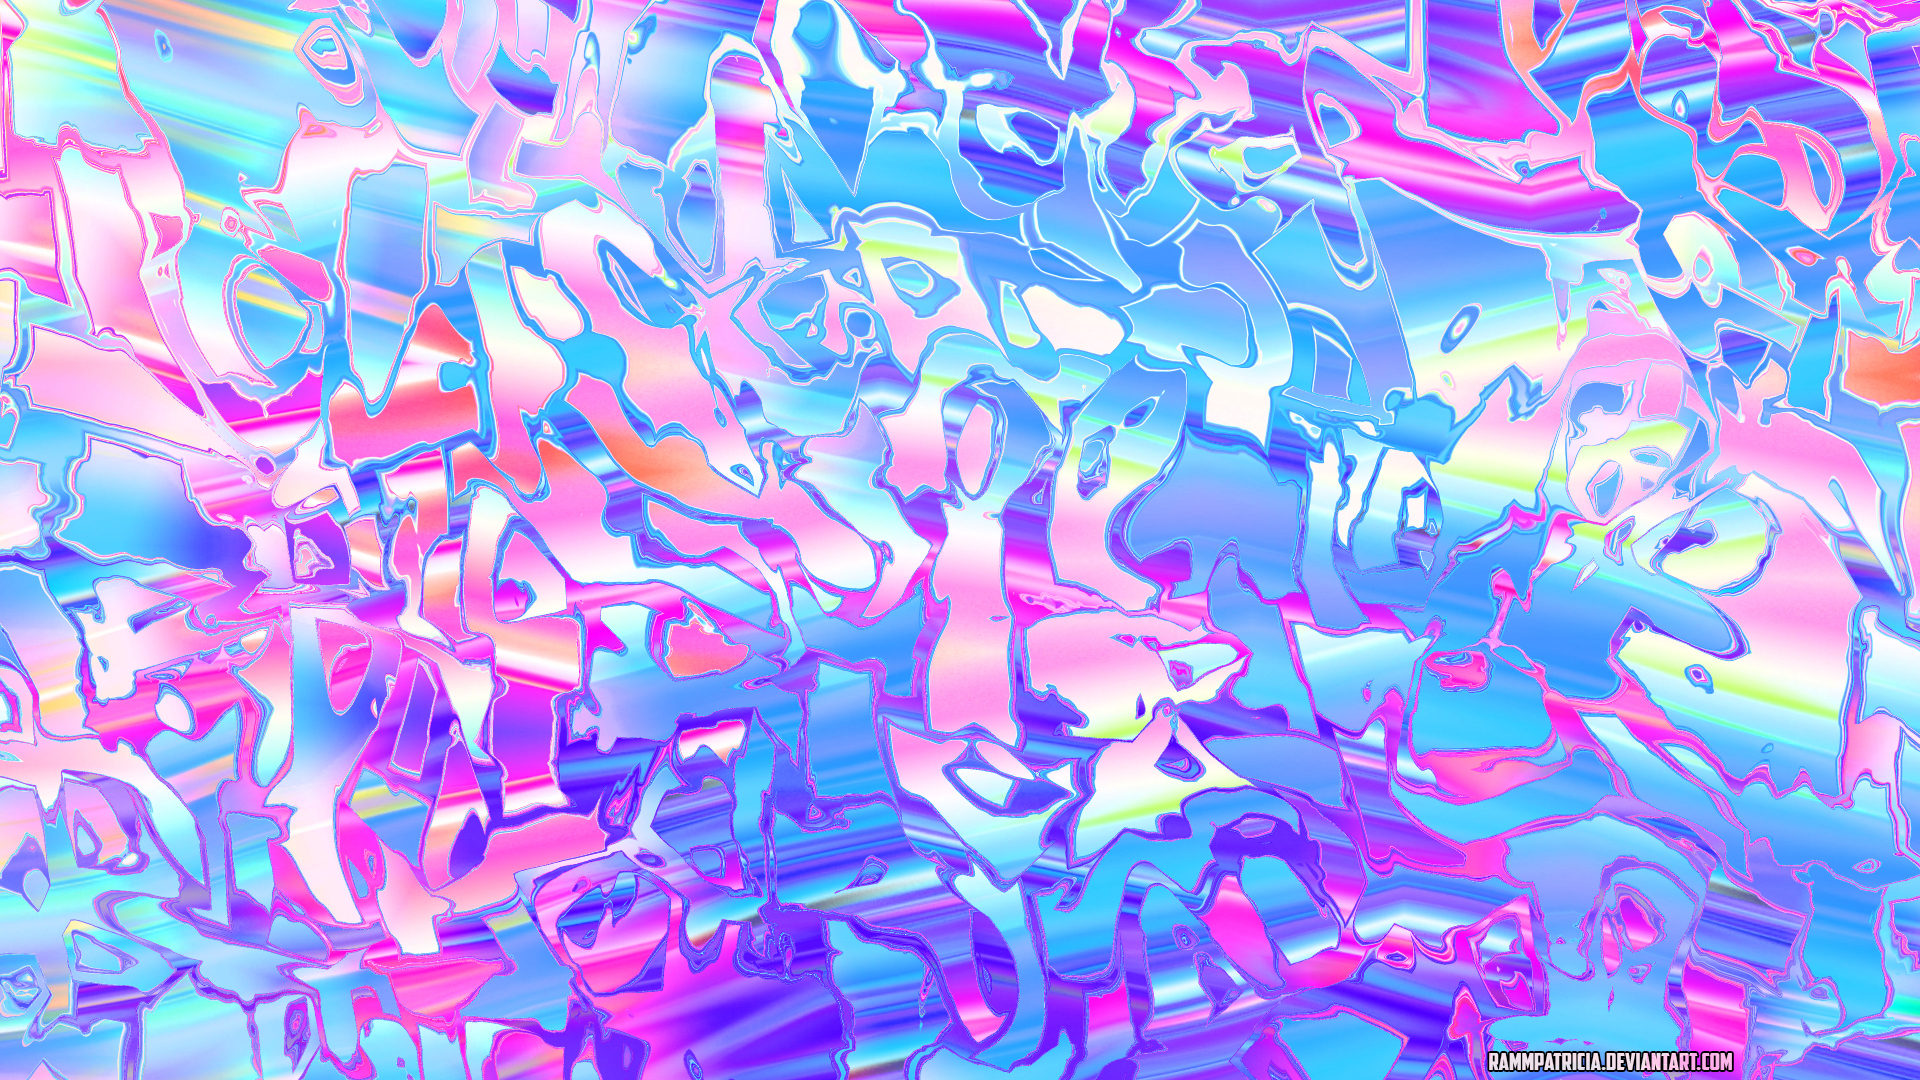 General 1920x1080 RammPatricia digital art abstract summer colorful